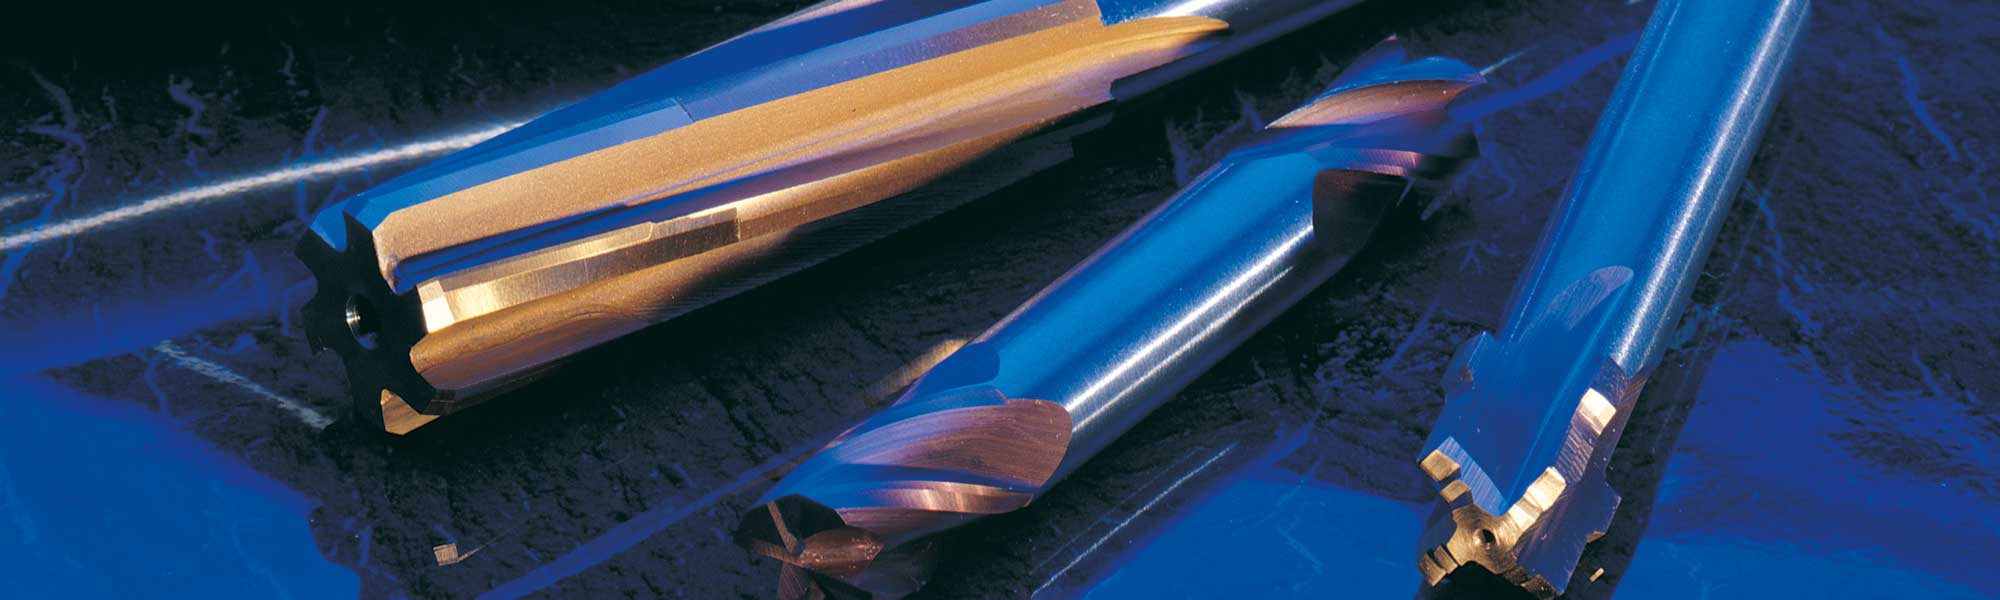 Special reamers, carbide reamers, coolant fed reamers, custom chucking reamers, reamer speeds and feeds. 